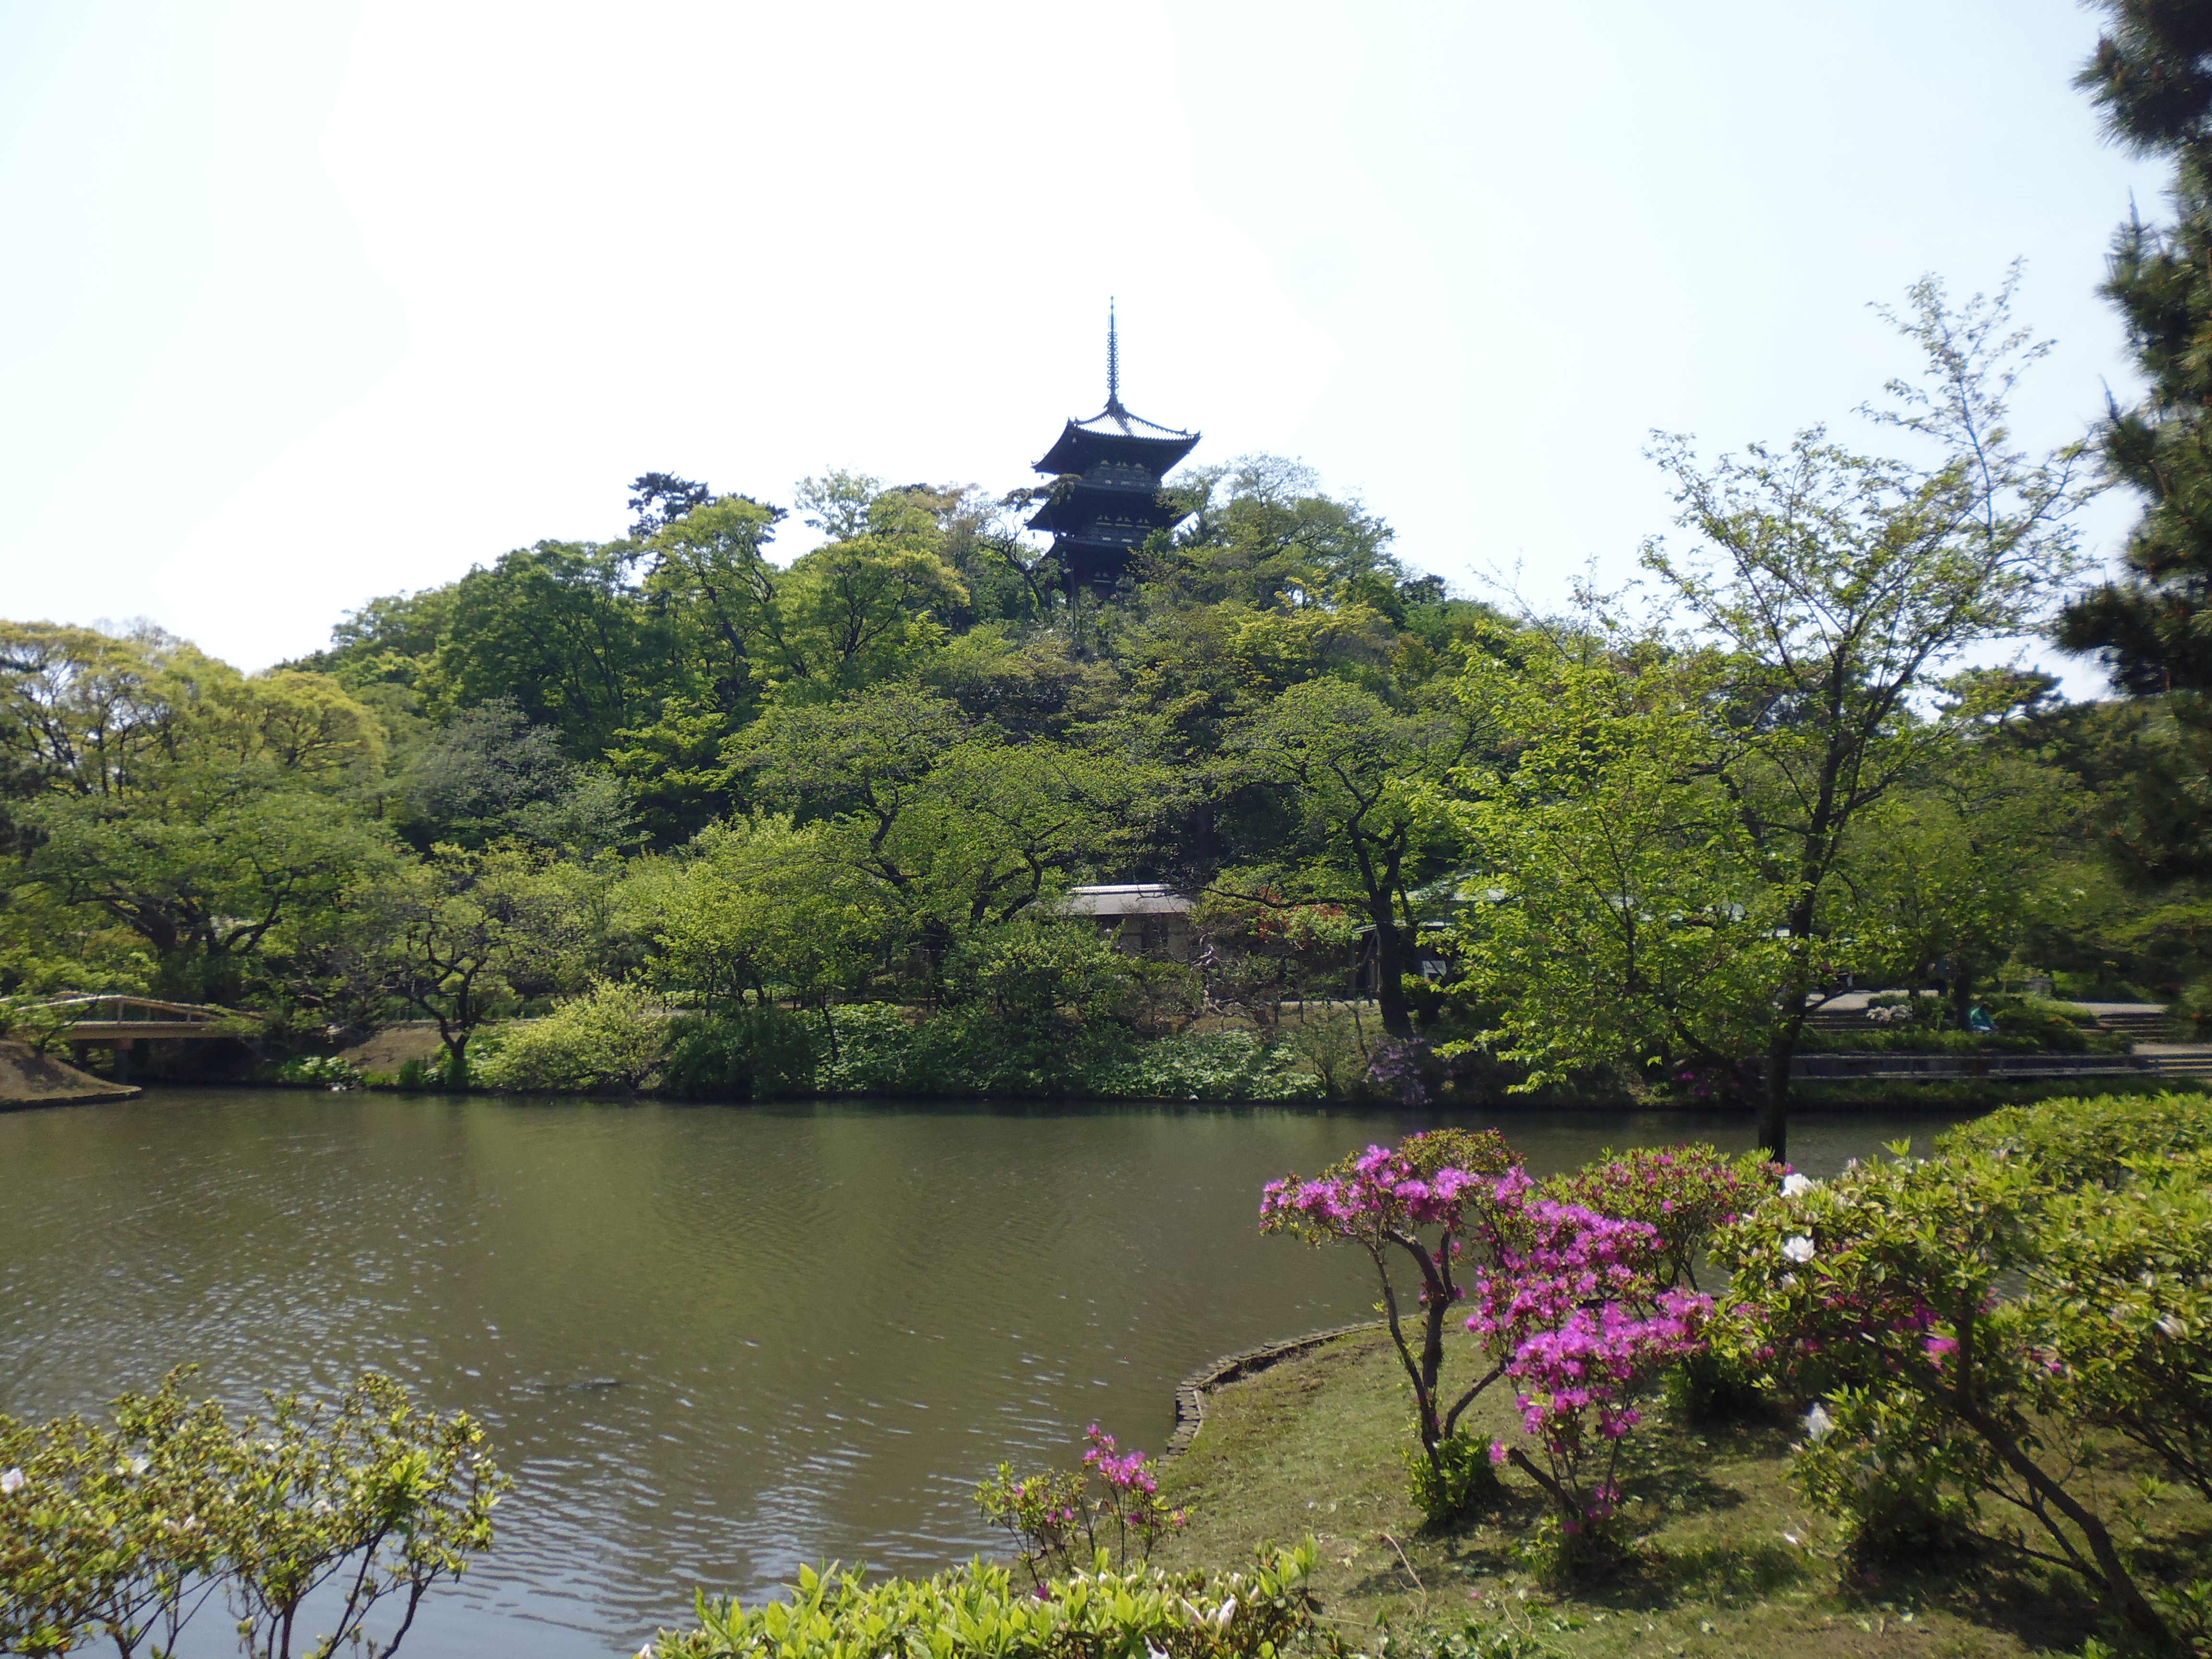 Sankei-en Garden was founded and designed by a successful silk trader, Hara Sankei in 1906. Besides beautiful Japanese-style gardens, where 10 old traditional wooden structures are designated as Important Cultural Properties. 